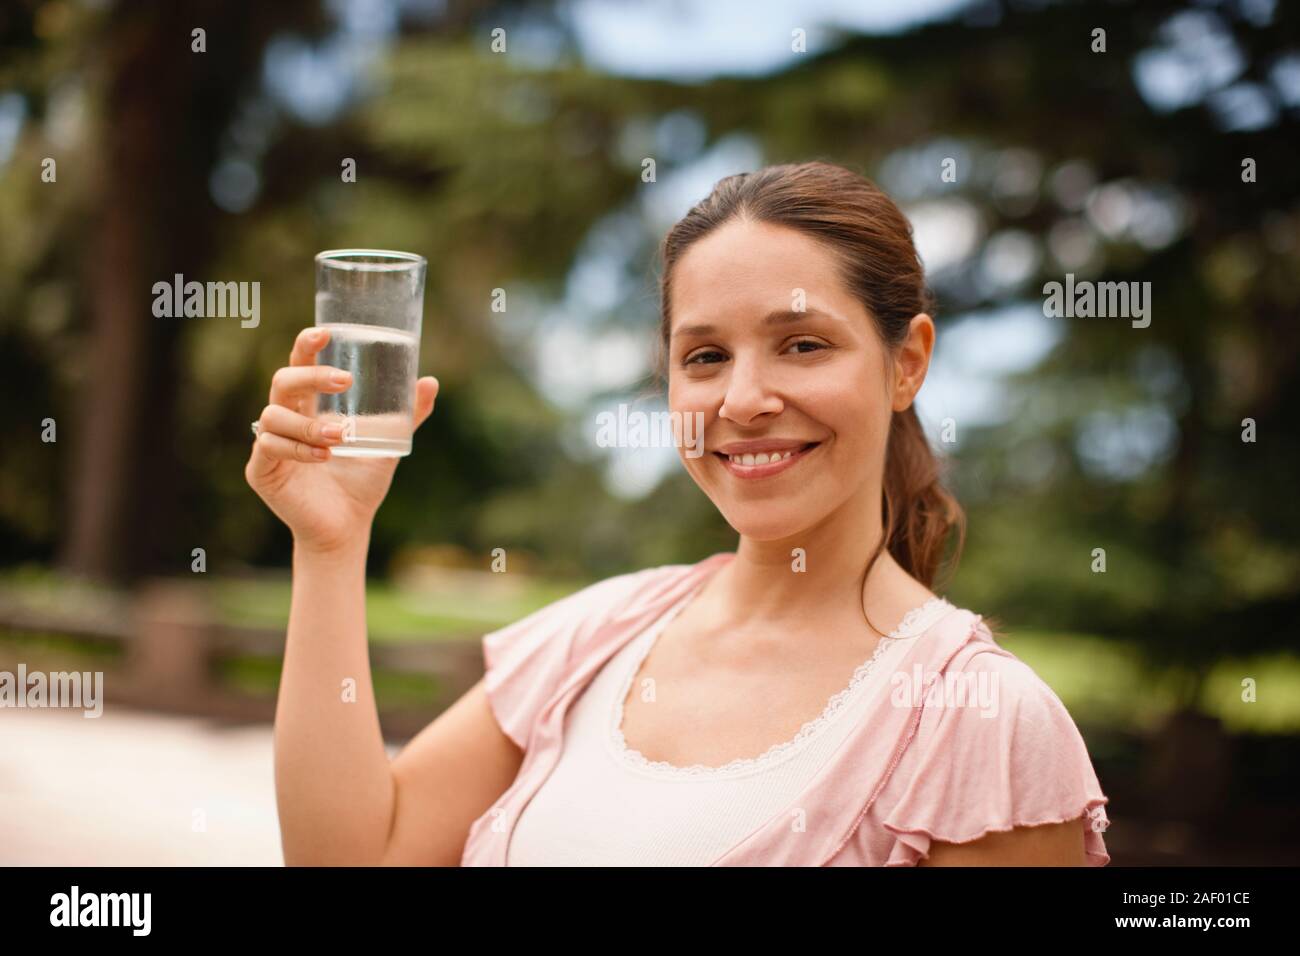 Twenty something woman holds up a glass of water. Stock Photo